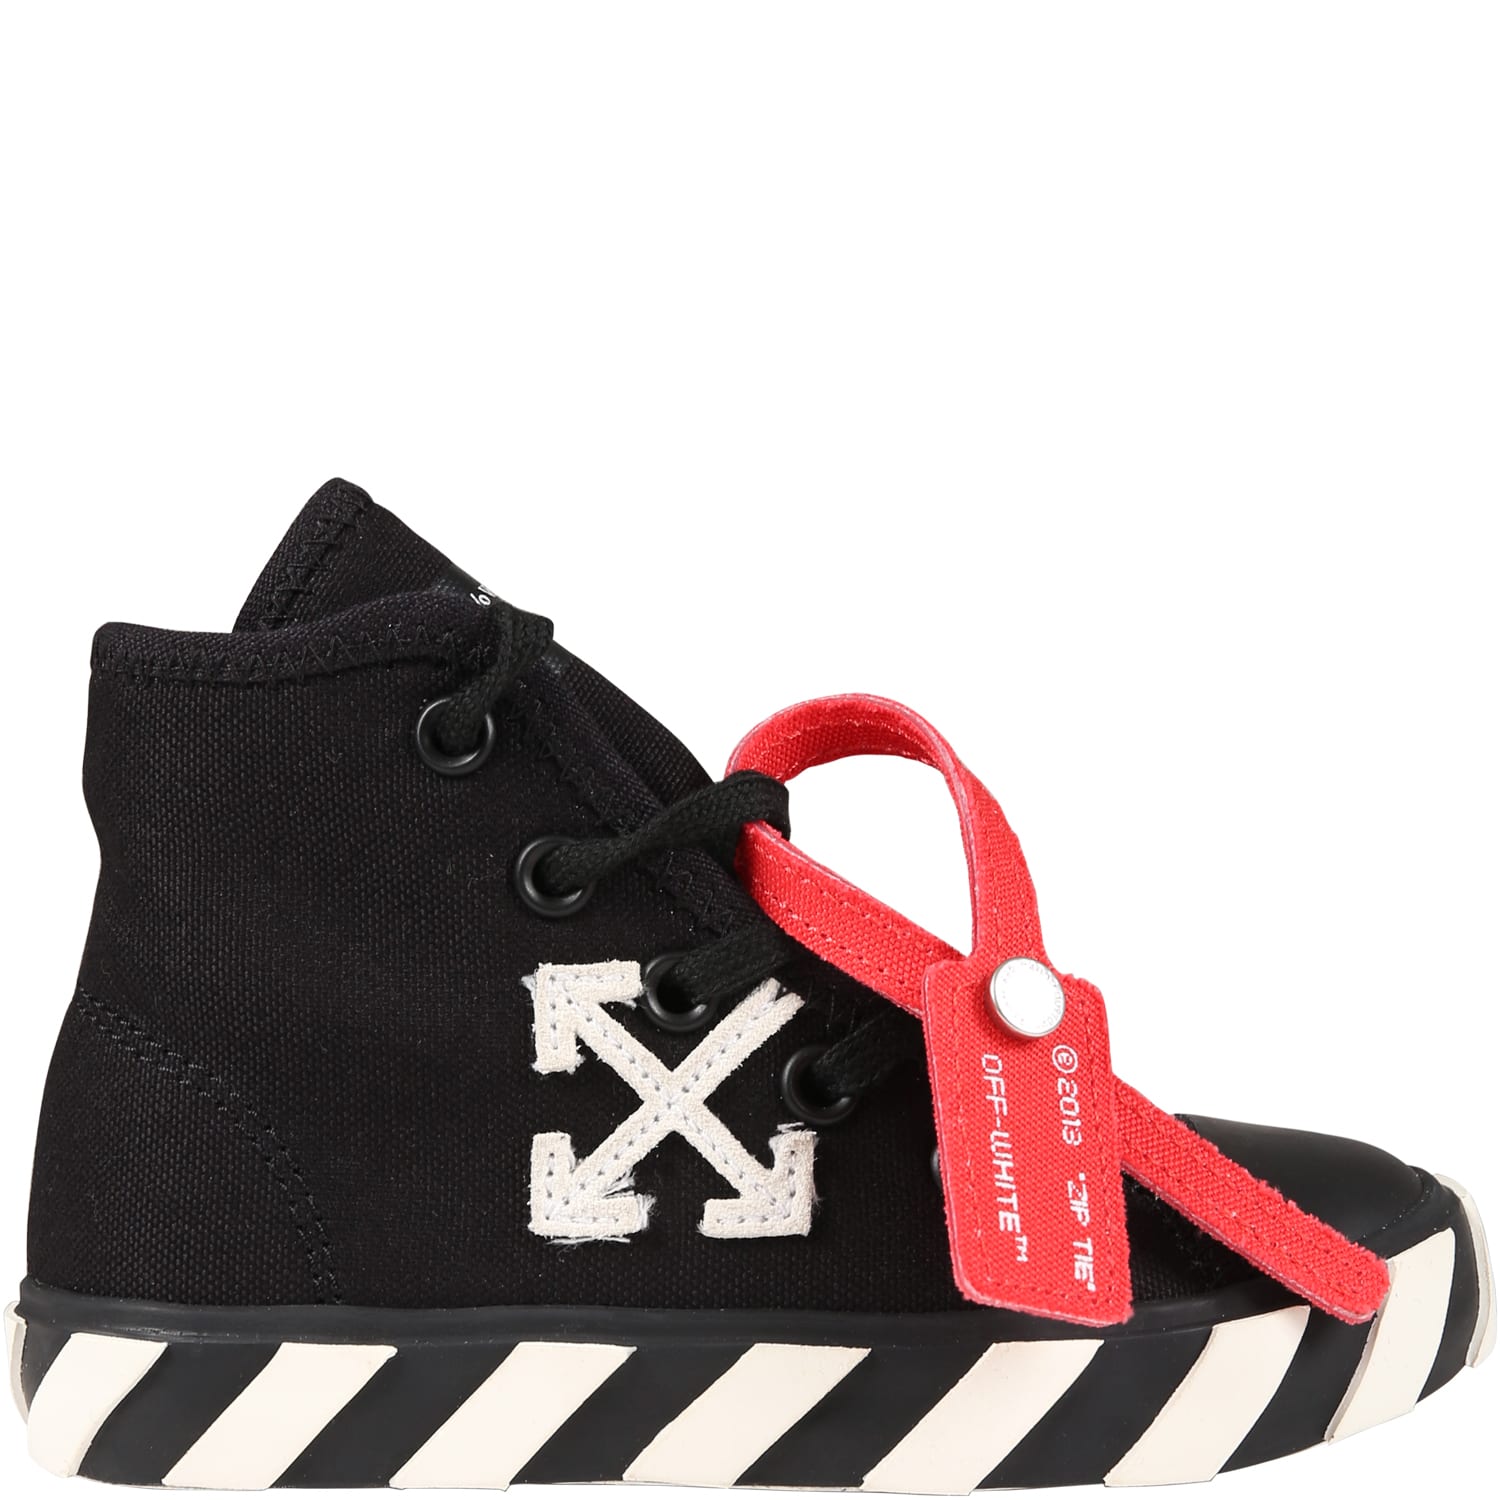 Off-White Black Sneakers For Kids With Iconic Arrows